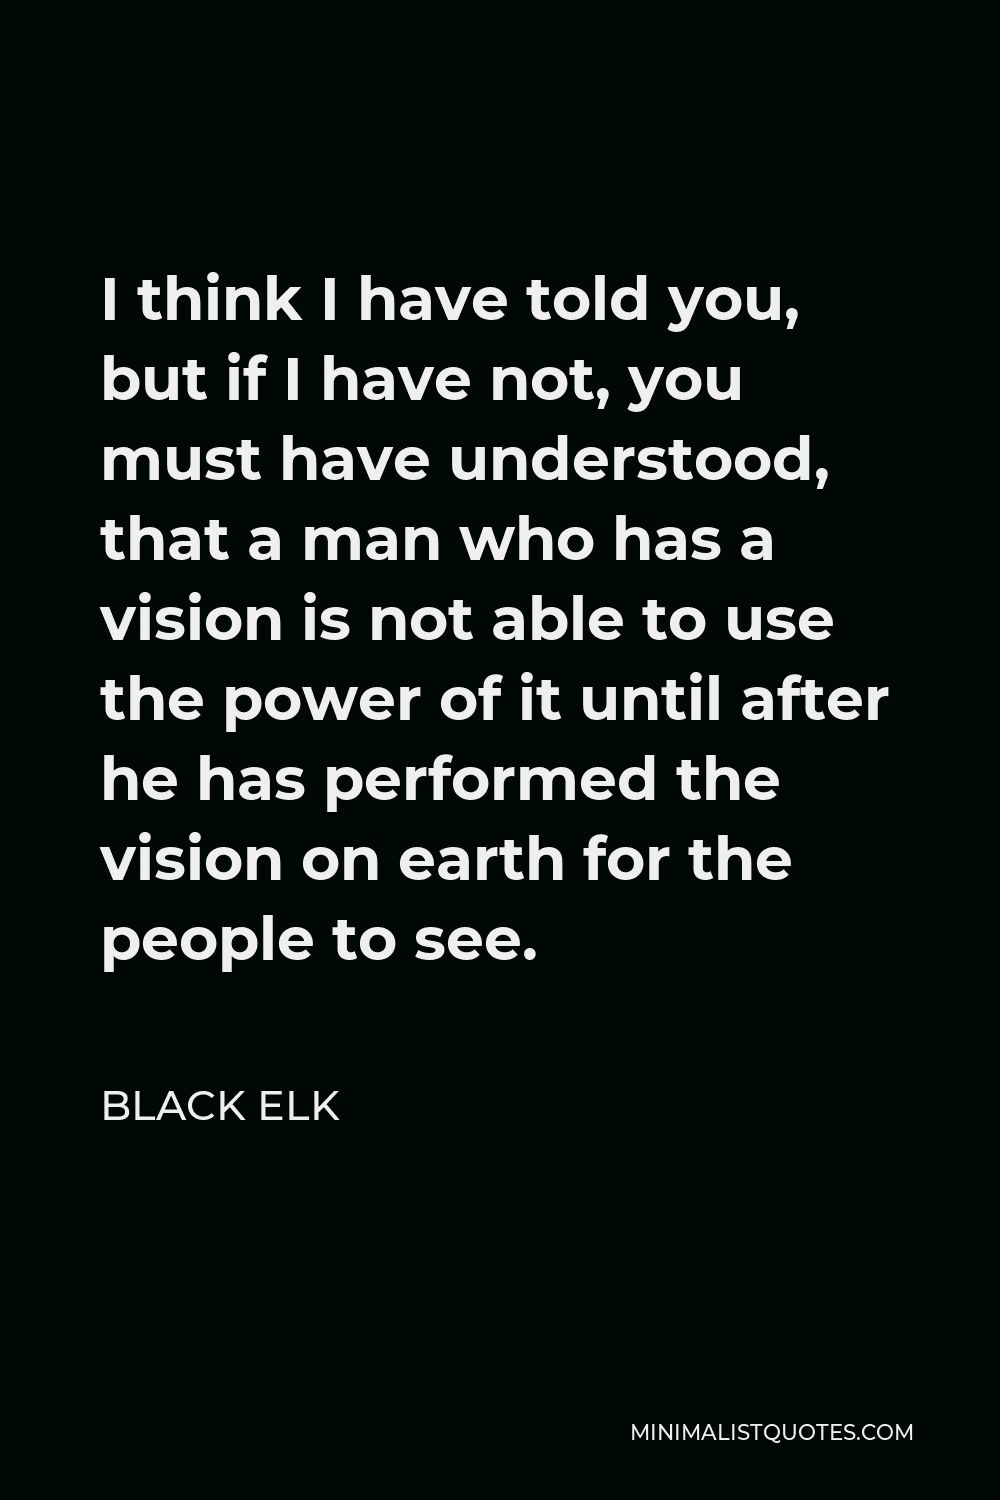 Black Elk Quote - I think I have told you, but if I have not, you must have understood, that a man who has a vision is not able to use the power of it until after he has performed the vision on earth for the people to see.